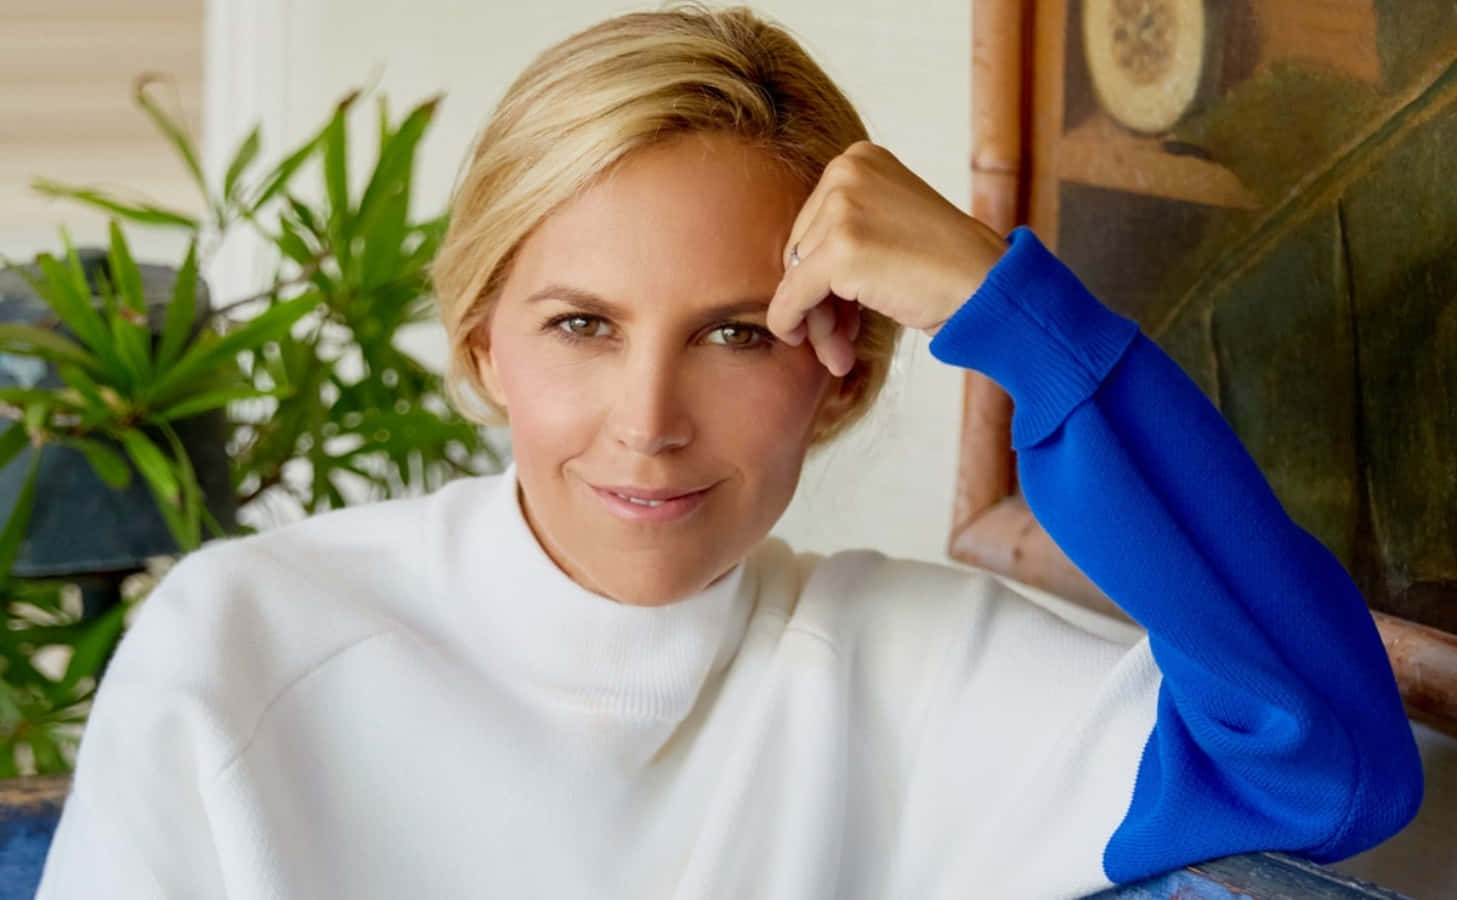 Designer Tory Burch at the Tory Burch Spring 2021 runway show